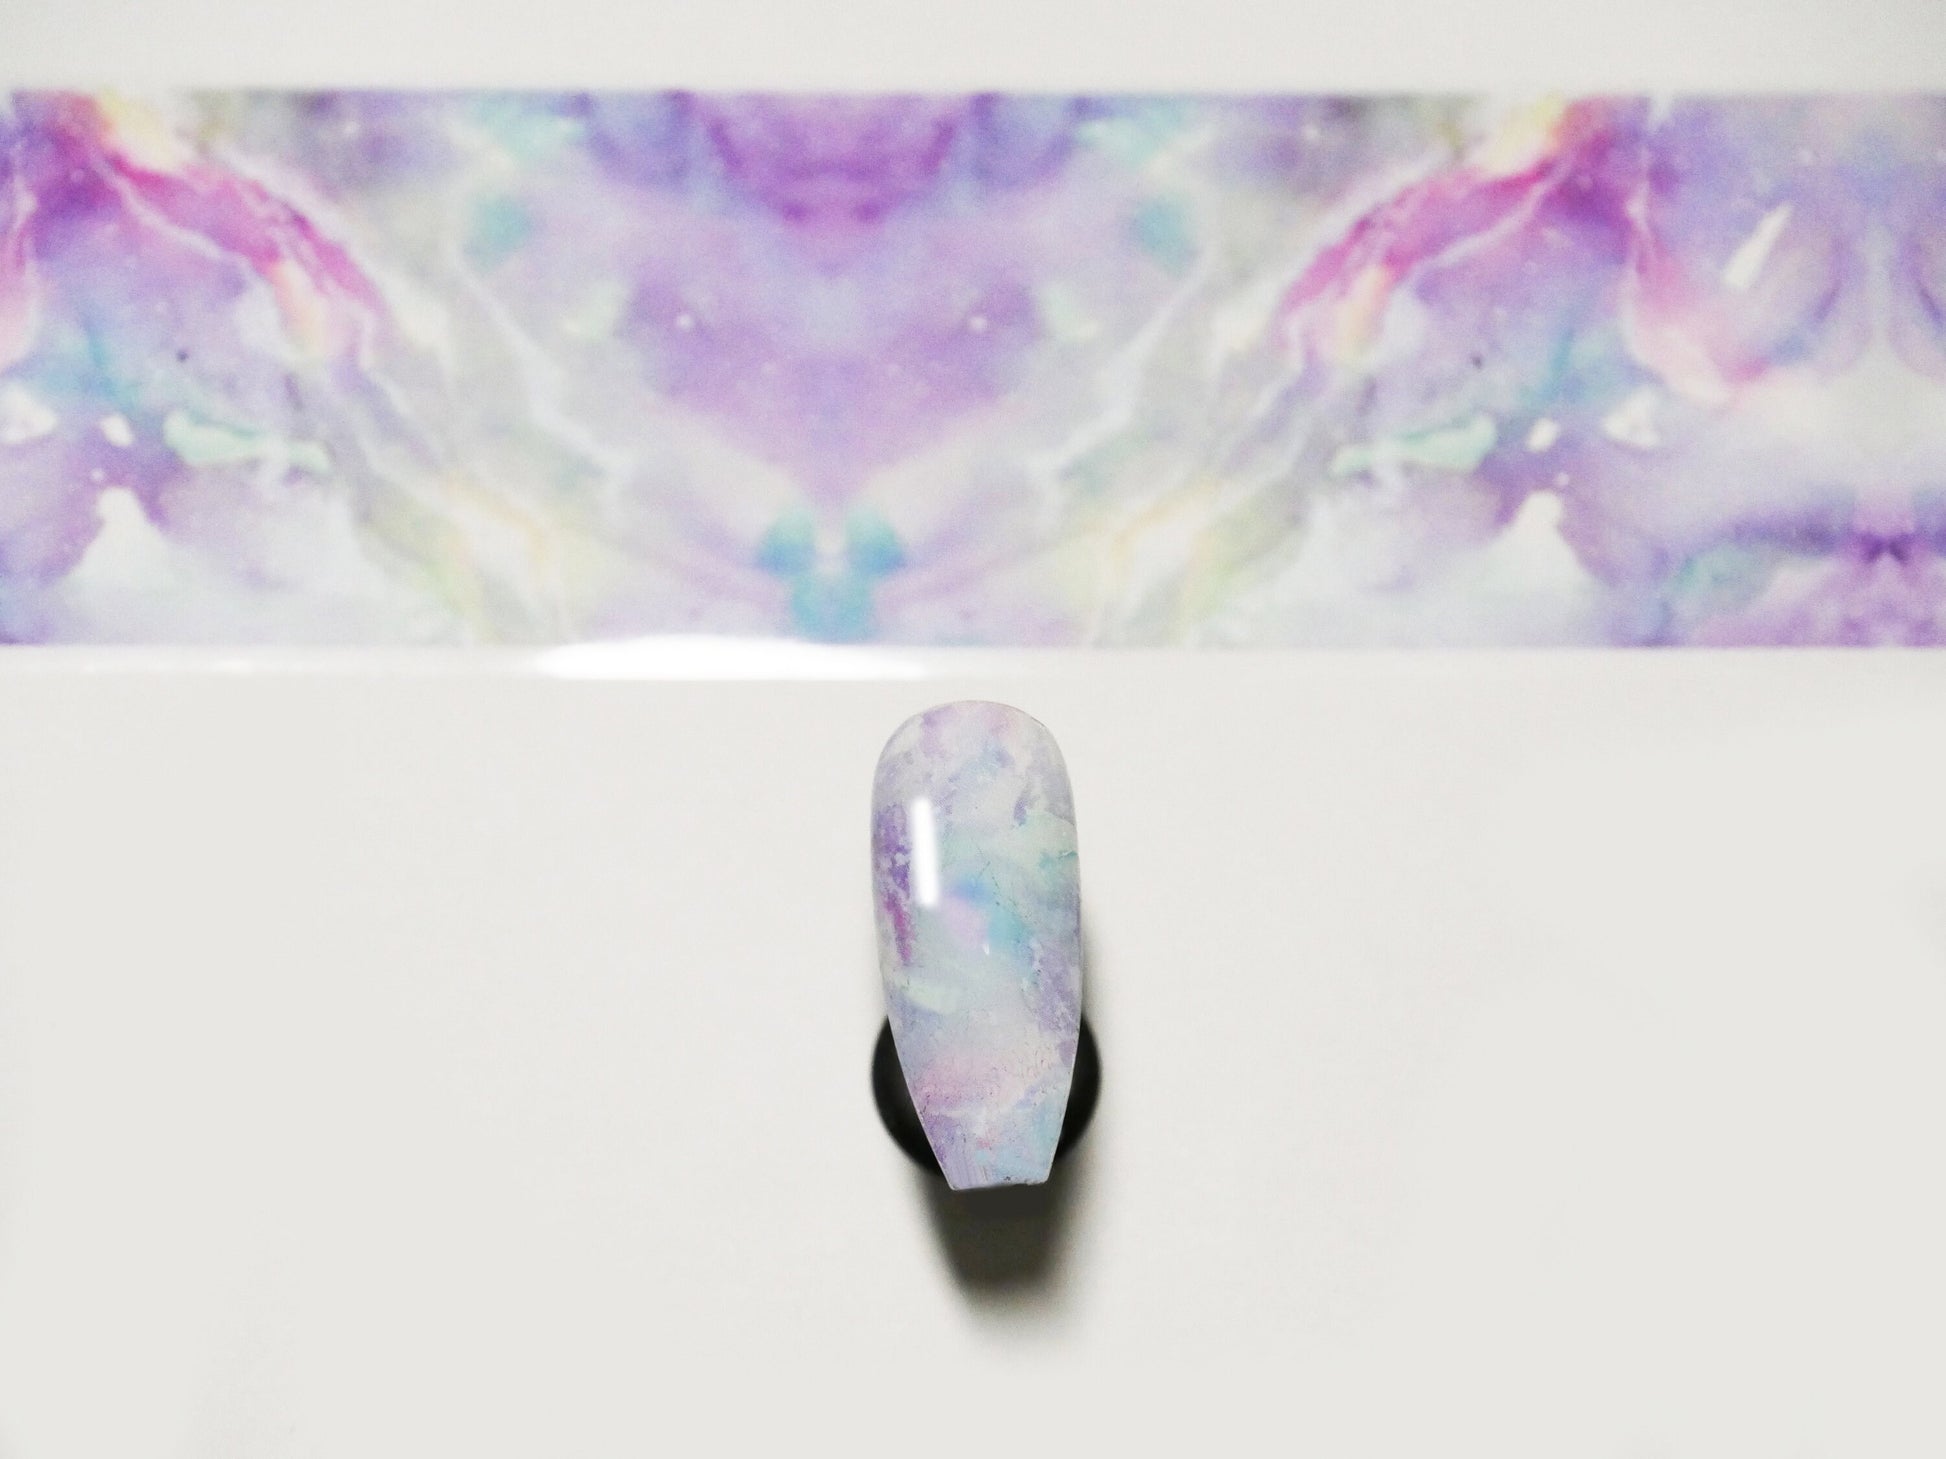 1.2 Y Pinky Marble Nail Foil/ Transfer paper Foil Nail Art Gradient Design Sticker Decal/ Nail Patterned DIY Milky Way theme nail design